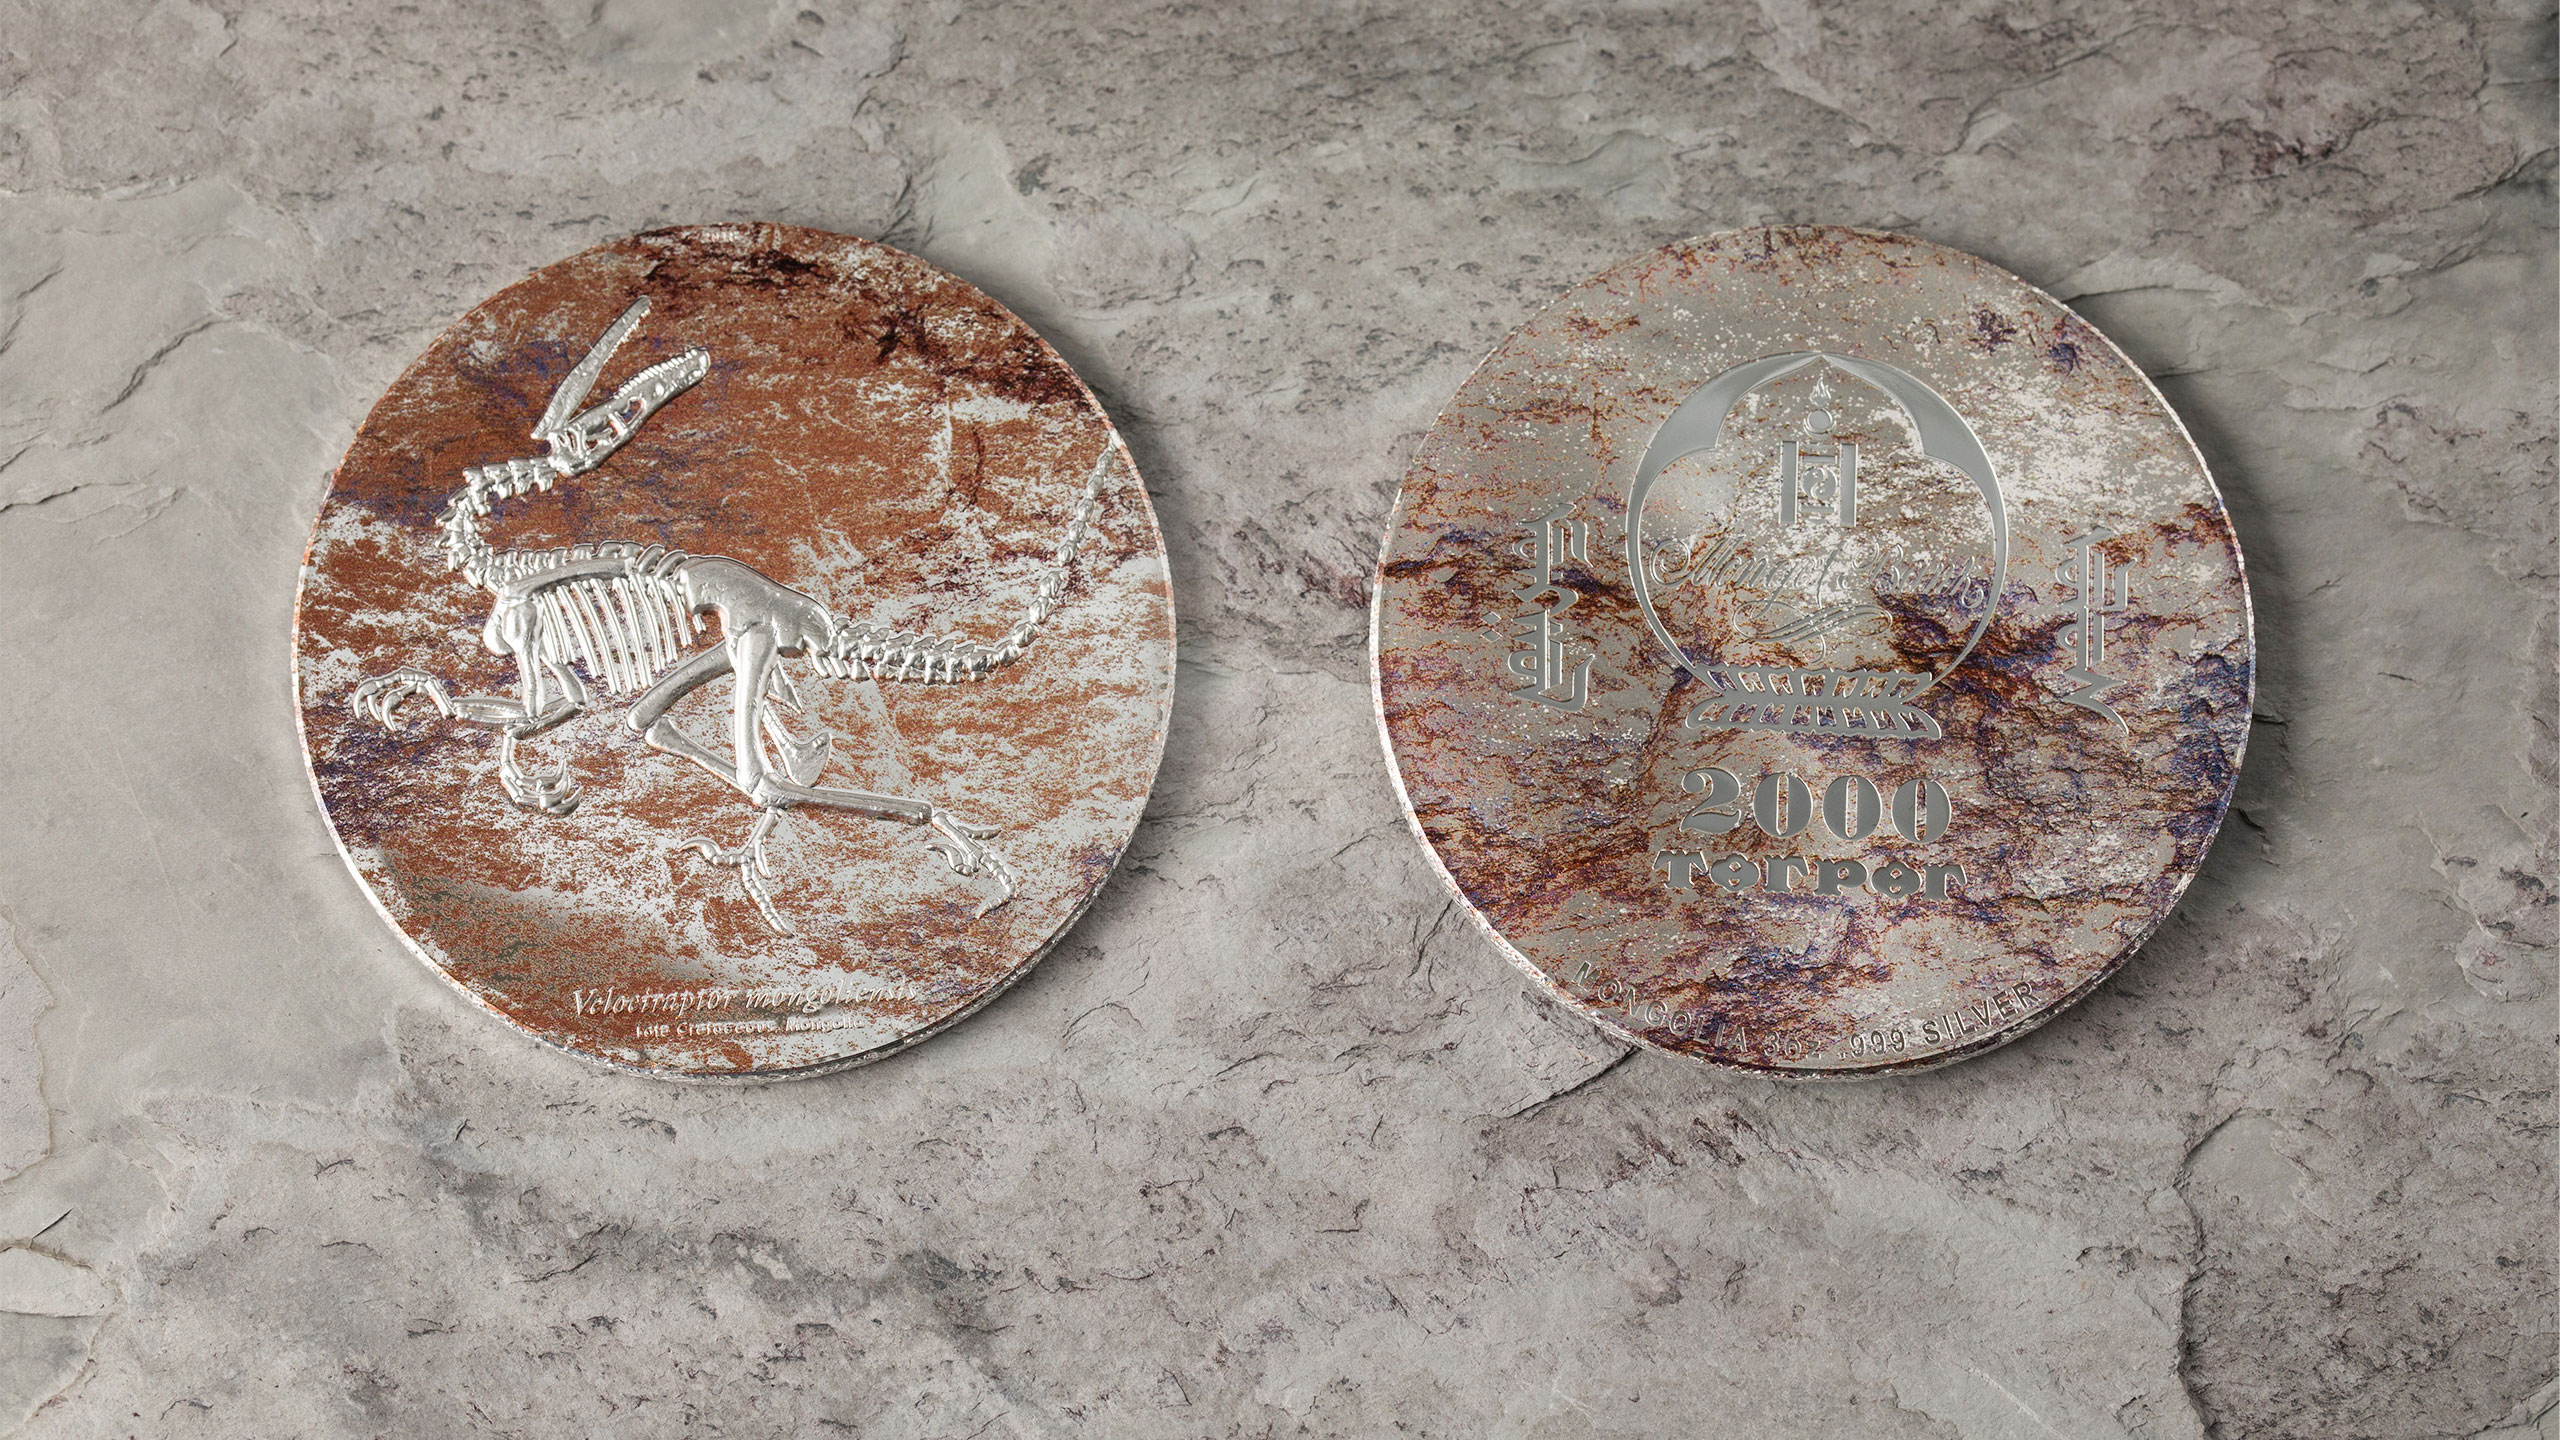 Velociraptor mongoliensis fossil silver coin with smartminting high relief by cit coin invest ag and b h mayer mint for mongolia